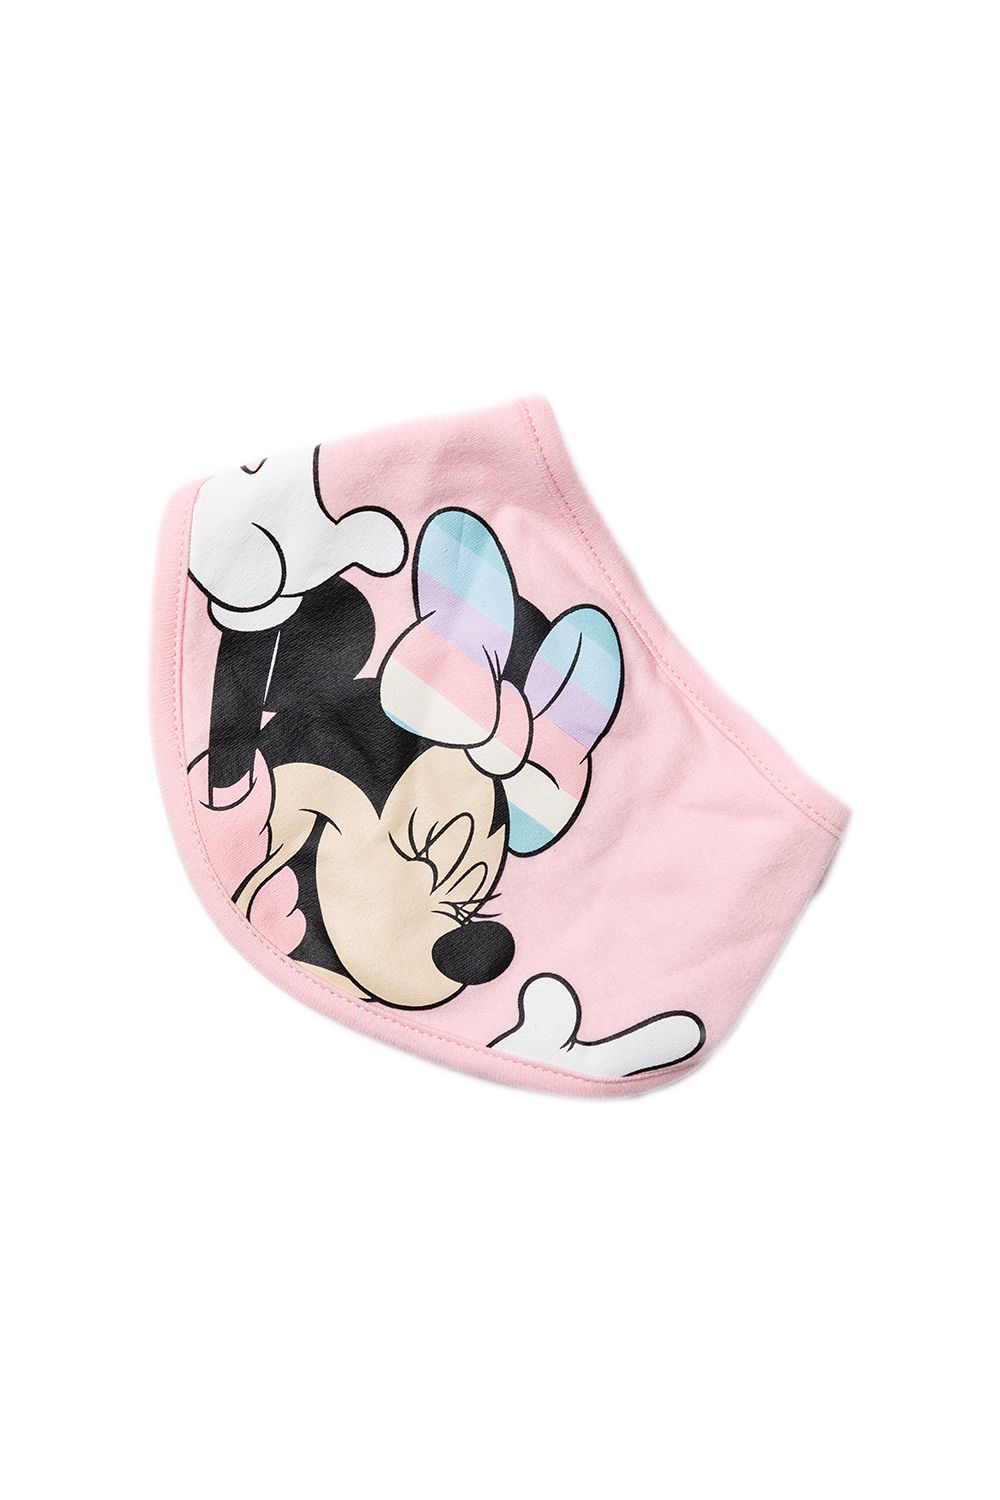 This adorable Disney Baby three-piece set features a rainbow themed Minnie Mouse print. The set includes a printed t-shirt, a pair of baby-pink, all-over print shorts and a matching bib! Each item in the set is cotton, keeping your little one comfortable. This would be a lovely gift or addition to your little ones wardrobe!